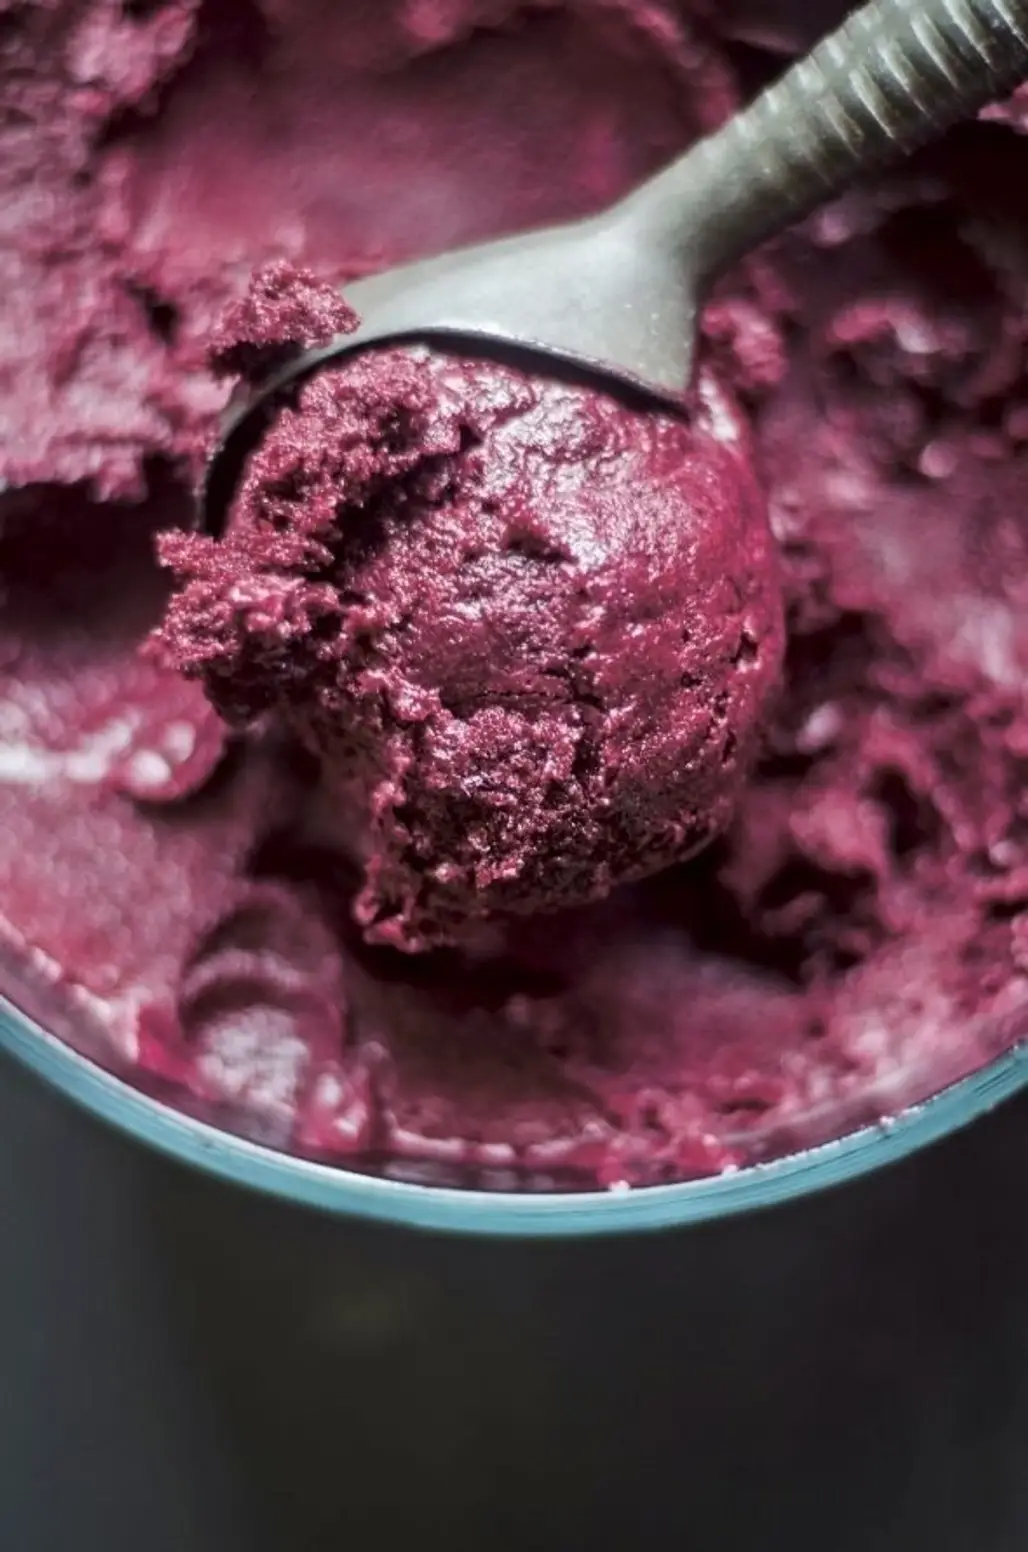 CONCORD GRAPE SORBET with ROSEMARY and BLACK PEPPER